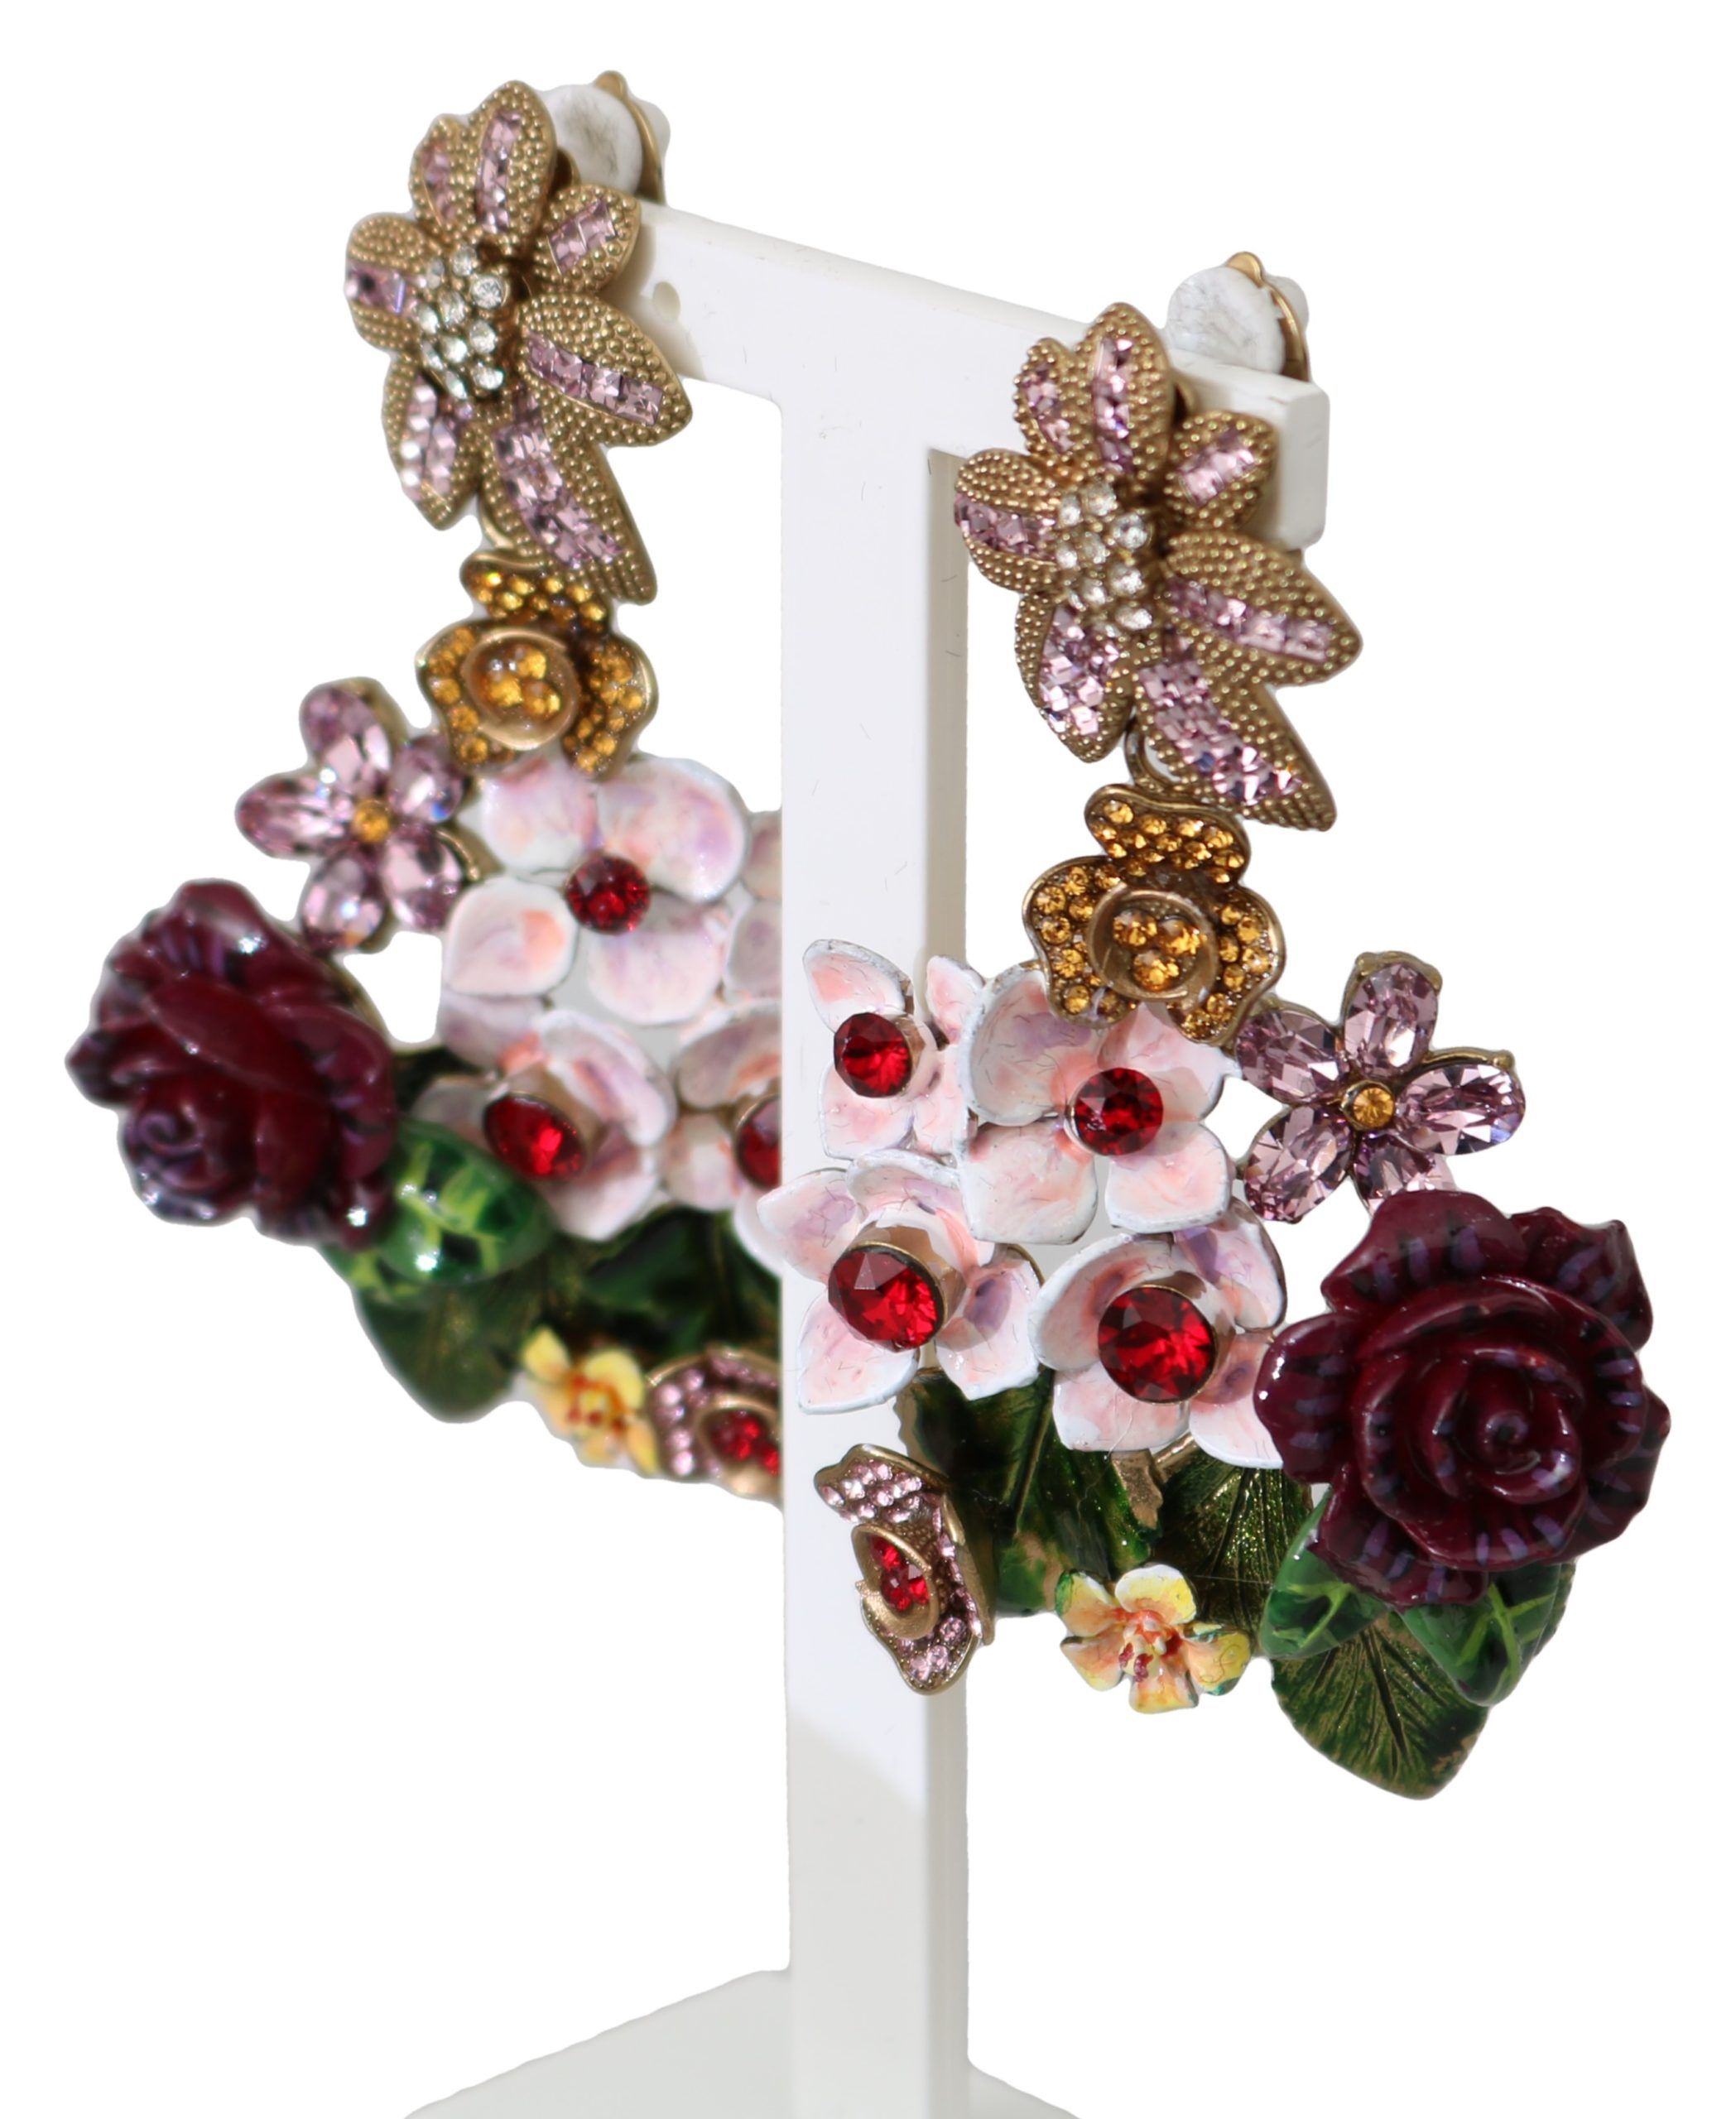 DOLCE & GABBANA
Gorgeous brand new with tags, 100% Authentic Dolce & Gabbana earrings.
Model: Clip-on, angling
Motive: FIORI BOUQUET, flowers
Material: 60% Brass, 20% glass, 20% crystals
Color: Gold, white, green
Crystals: Purple, red, gold
Logo details
Made in Italy

Length: 7 cm